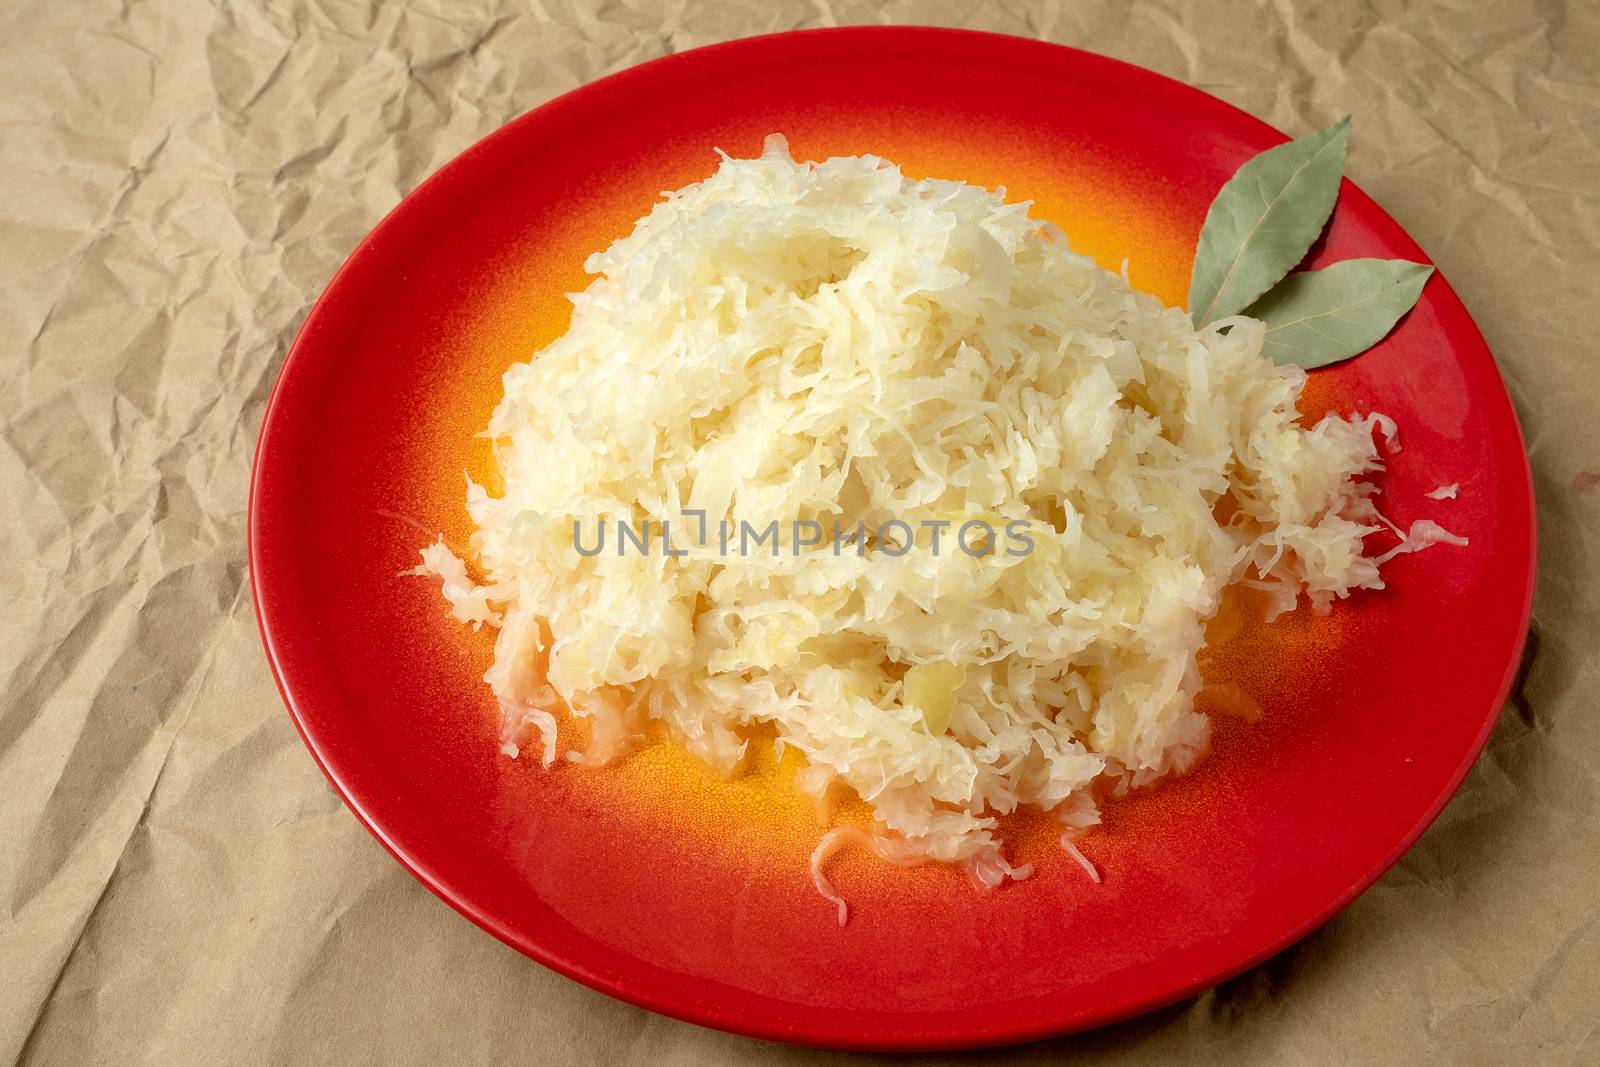 Fermented cabbage. Red plate of sauerkraut (pickled white cabbage).